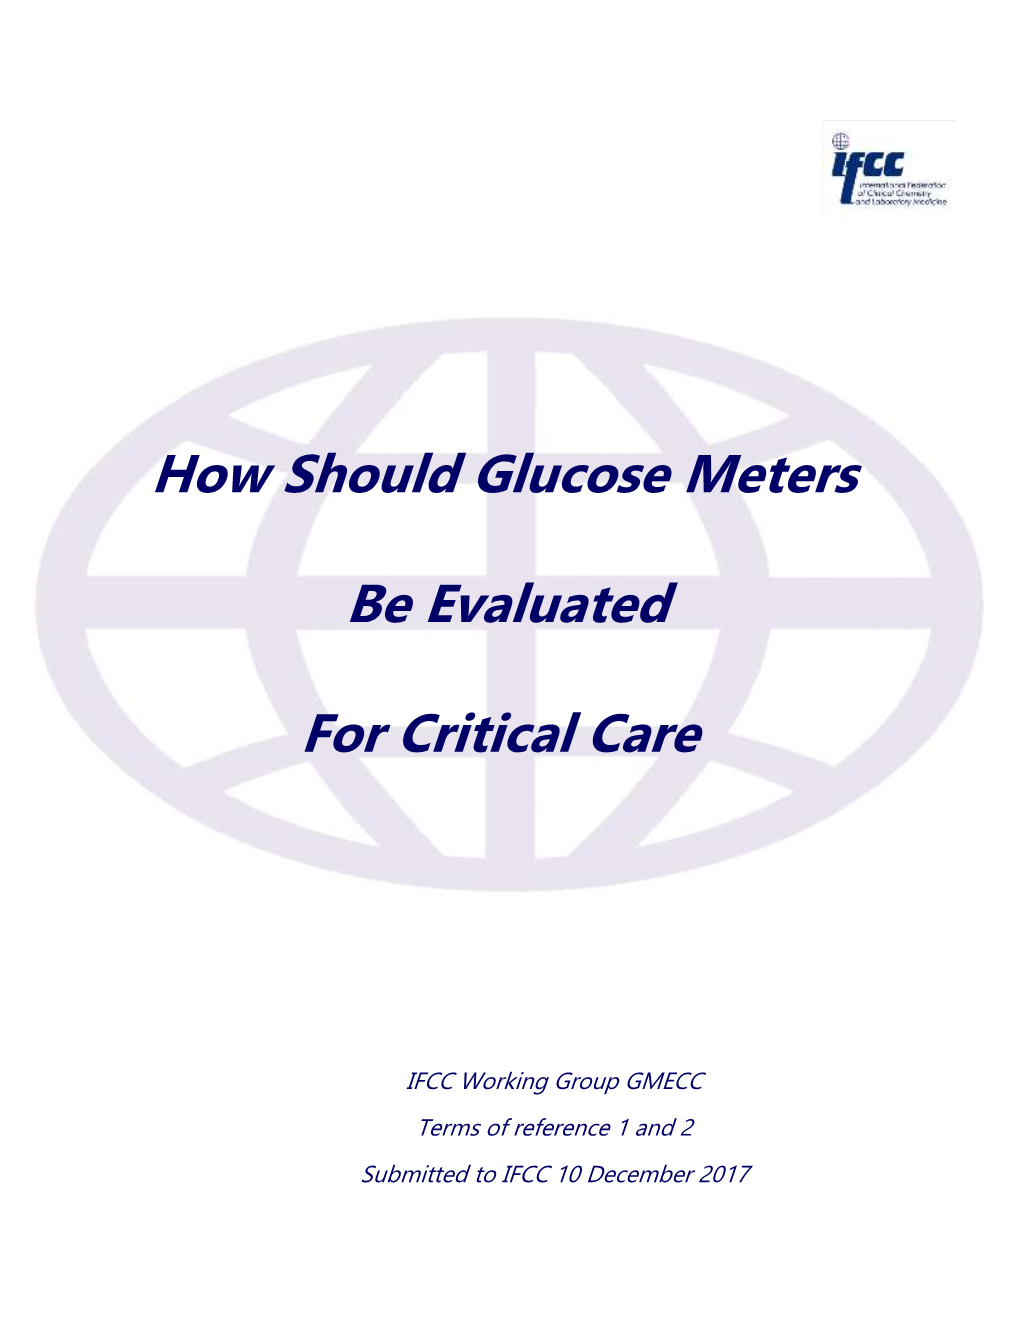 How Should Glucose Meters Be Evaluated for Critical Care